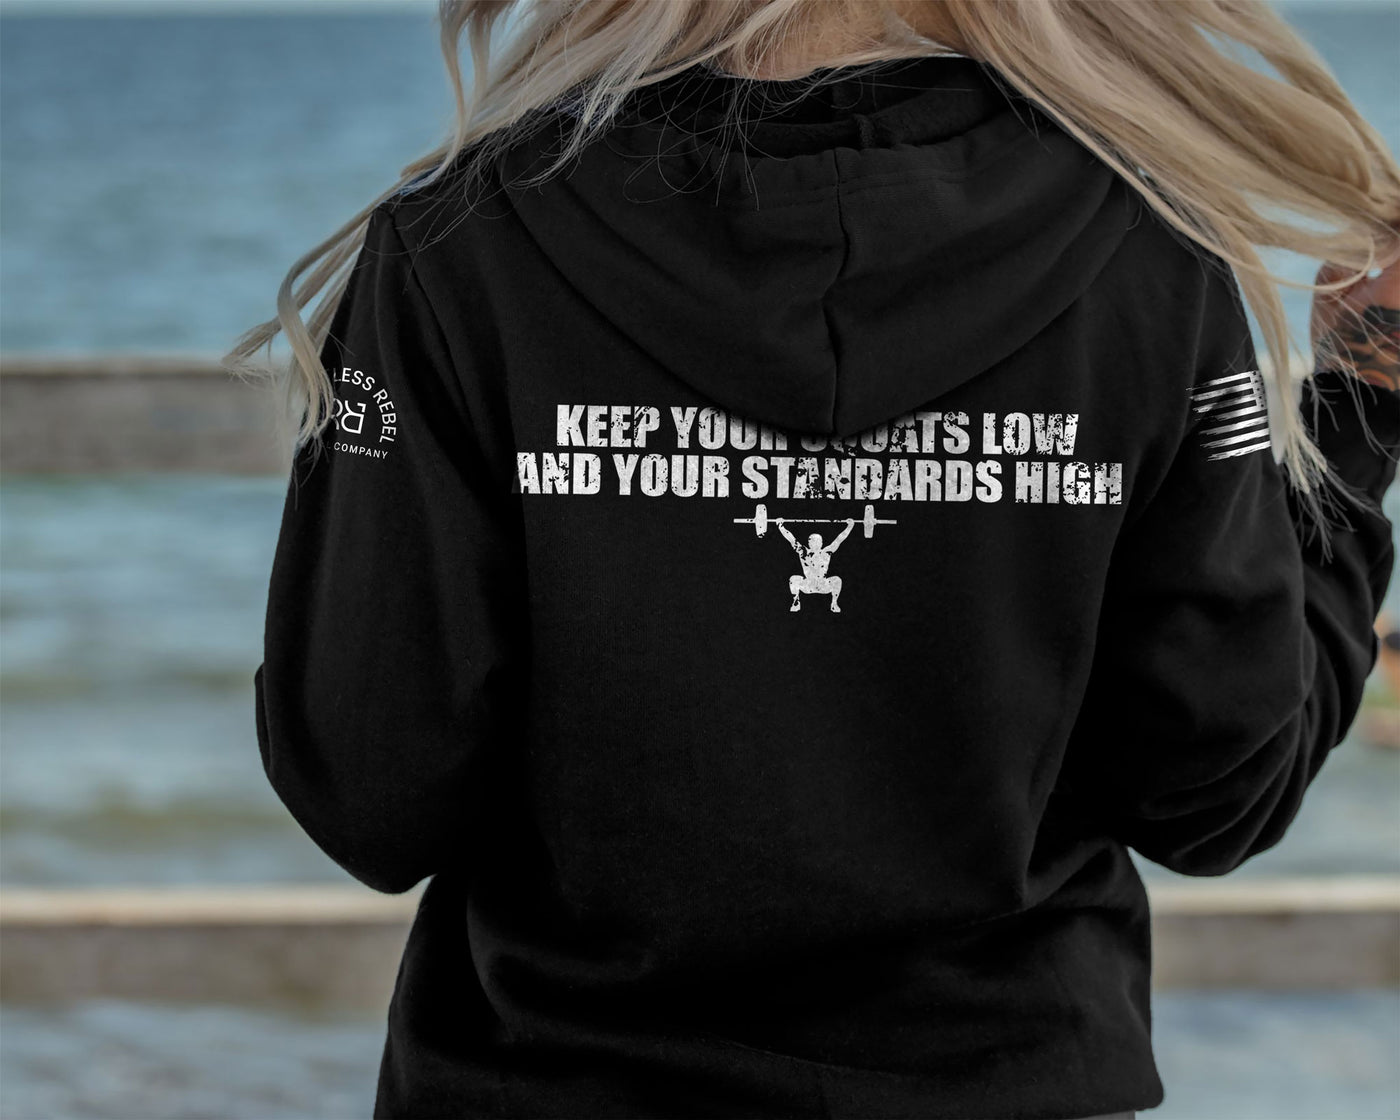 Woman wearing Solid Black Women's Keep Your Squats Low and Your Standards High Back Design Hoodie